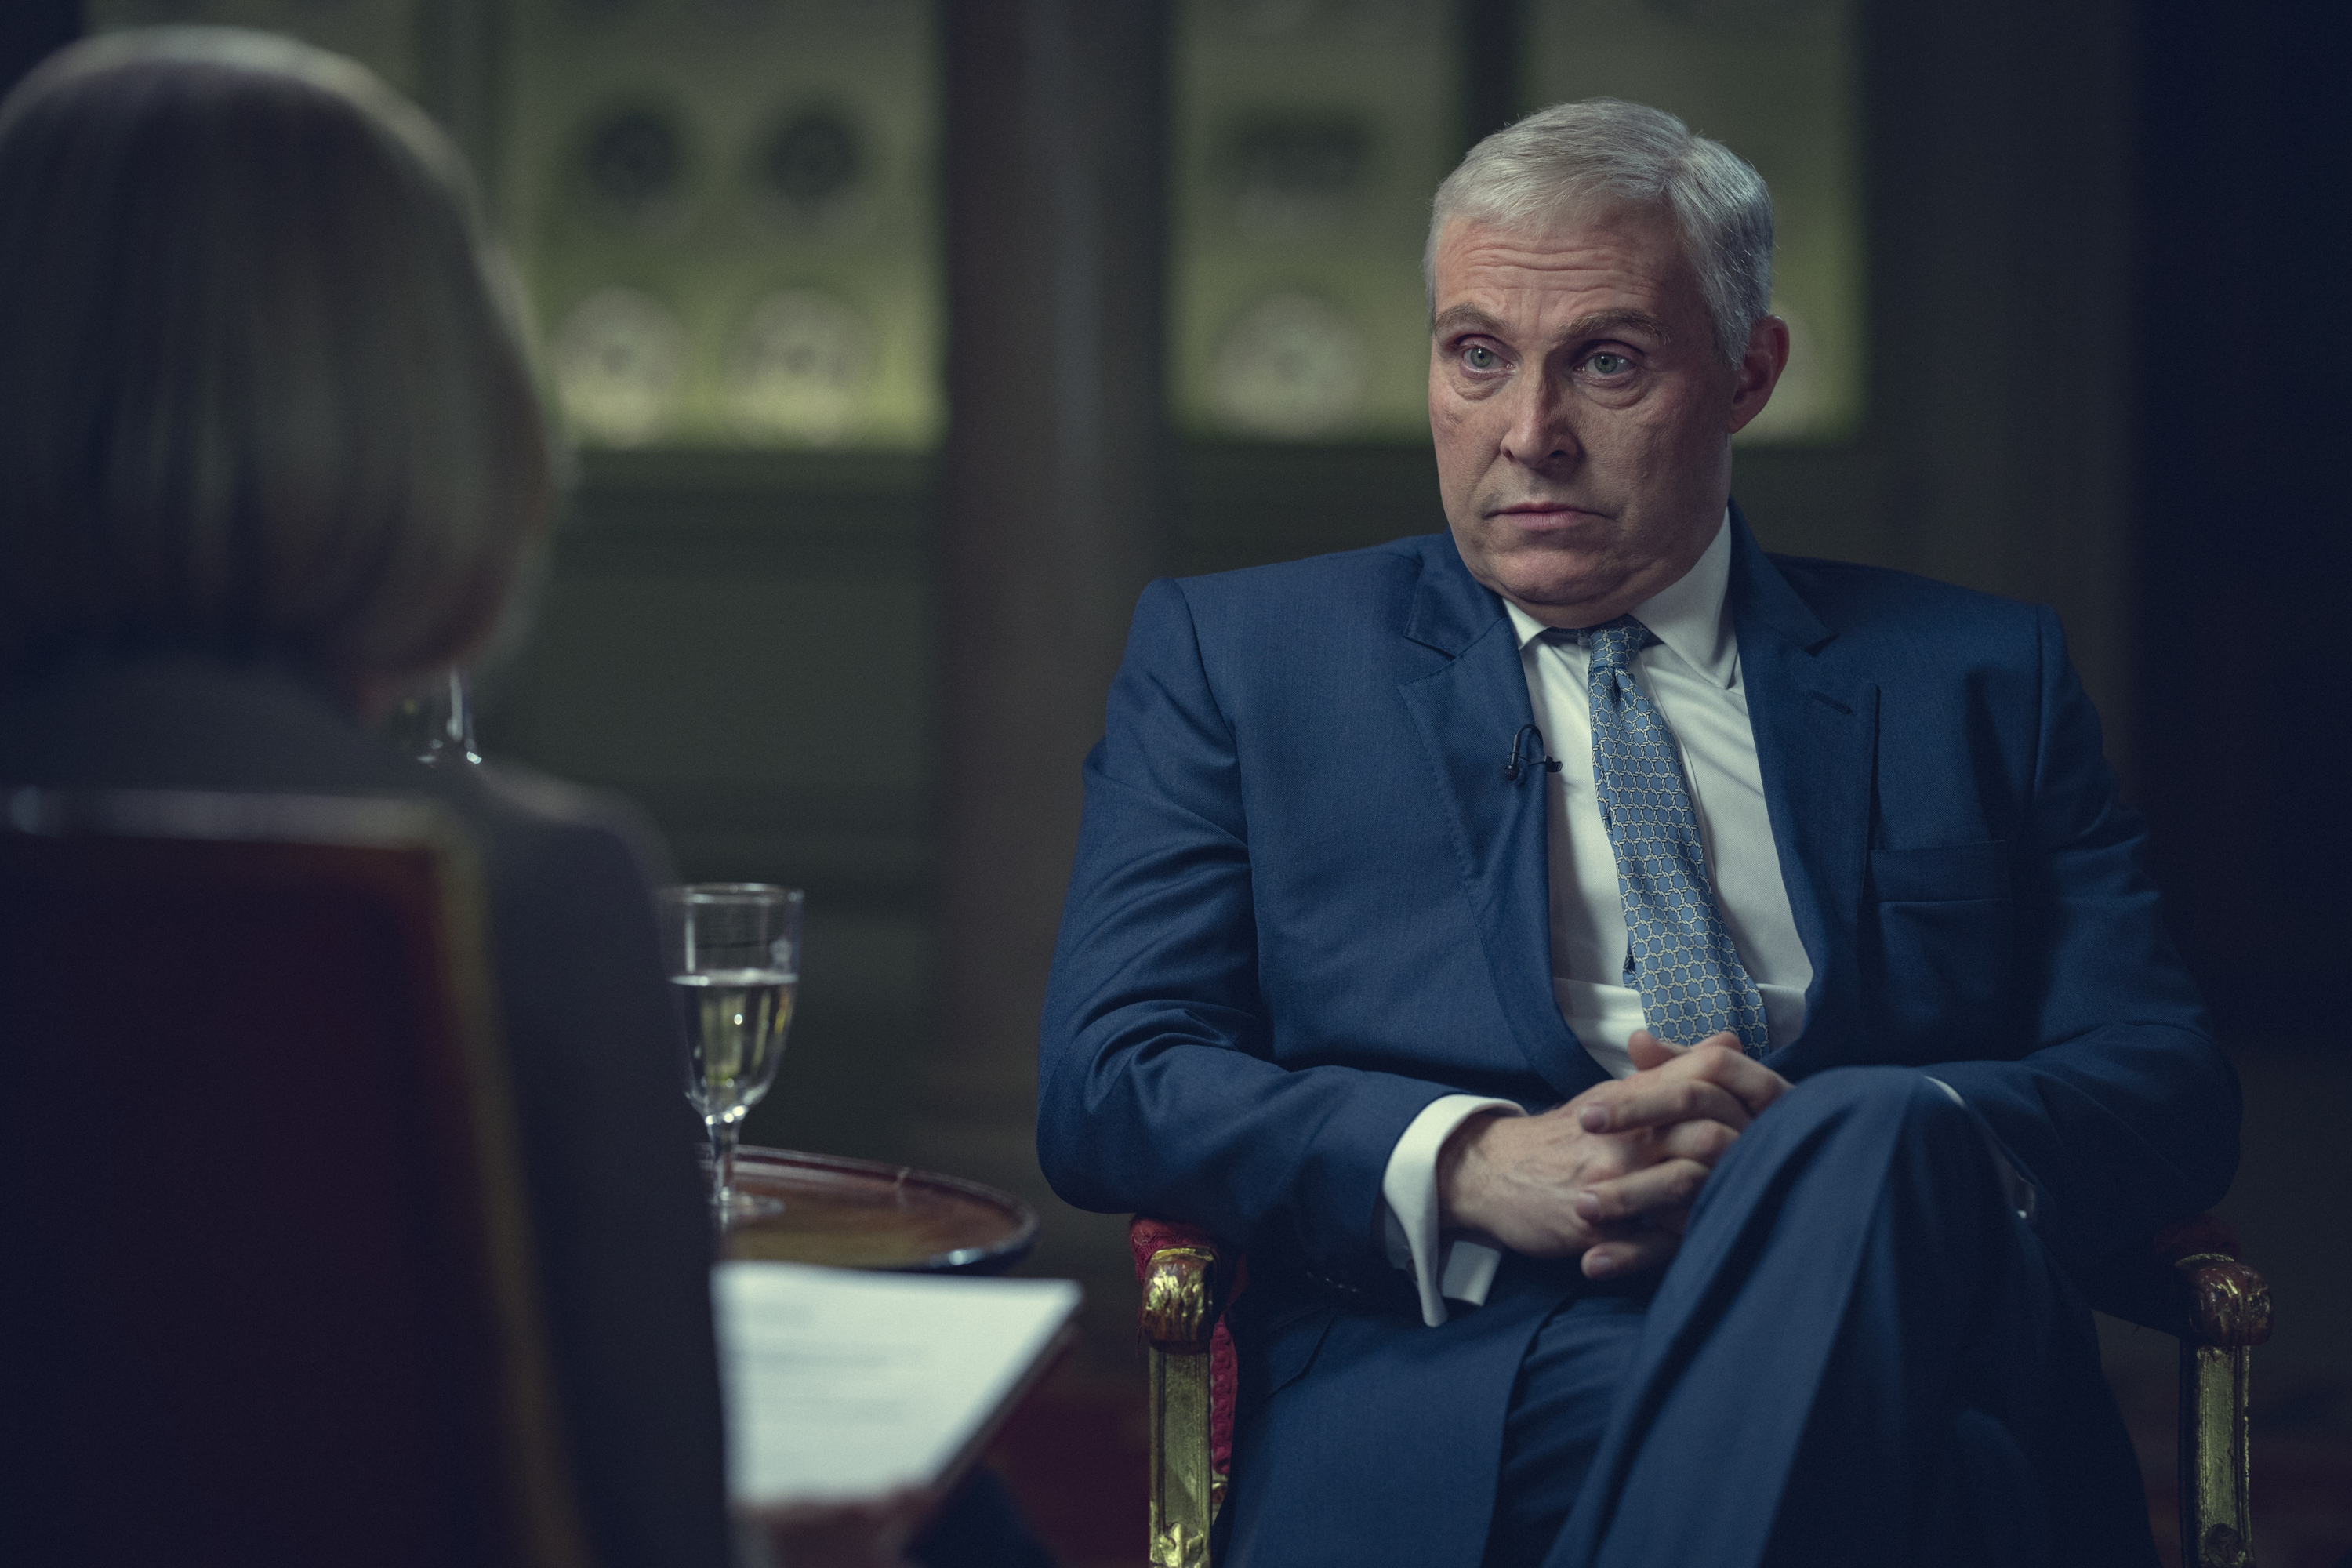 Rufus Sewell plays Prince Andrew in Netflix flick Scoop, which takes a look at the Duke of York's disastrous 2019 BBC Newsnight interview